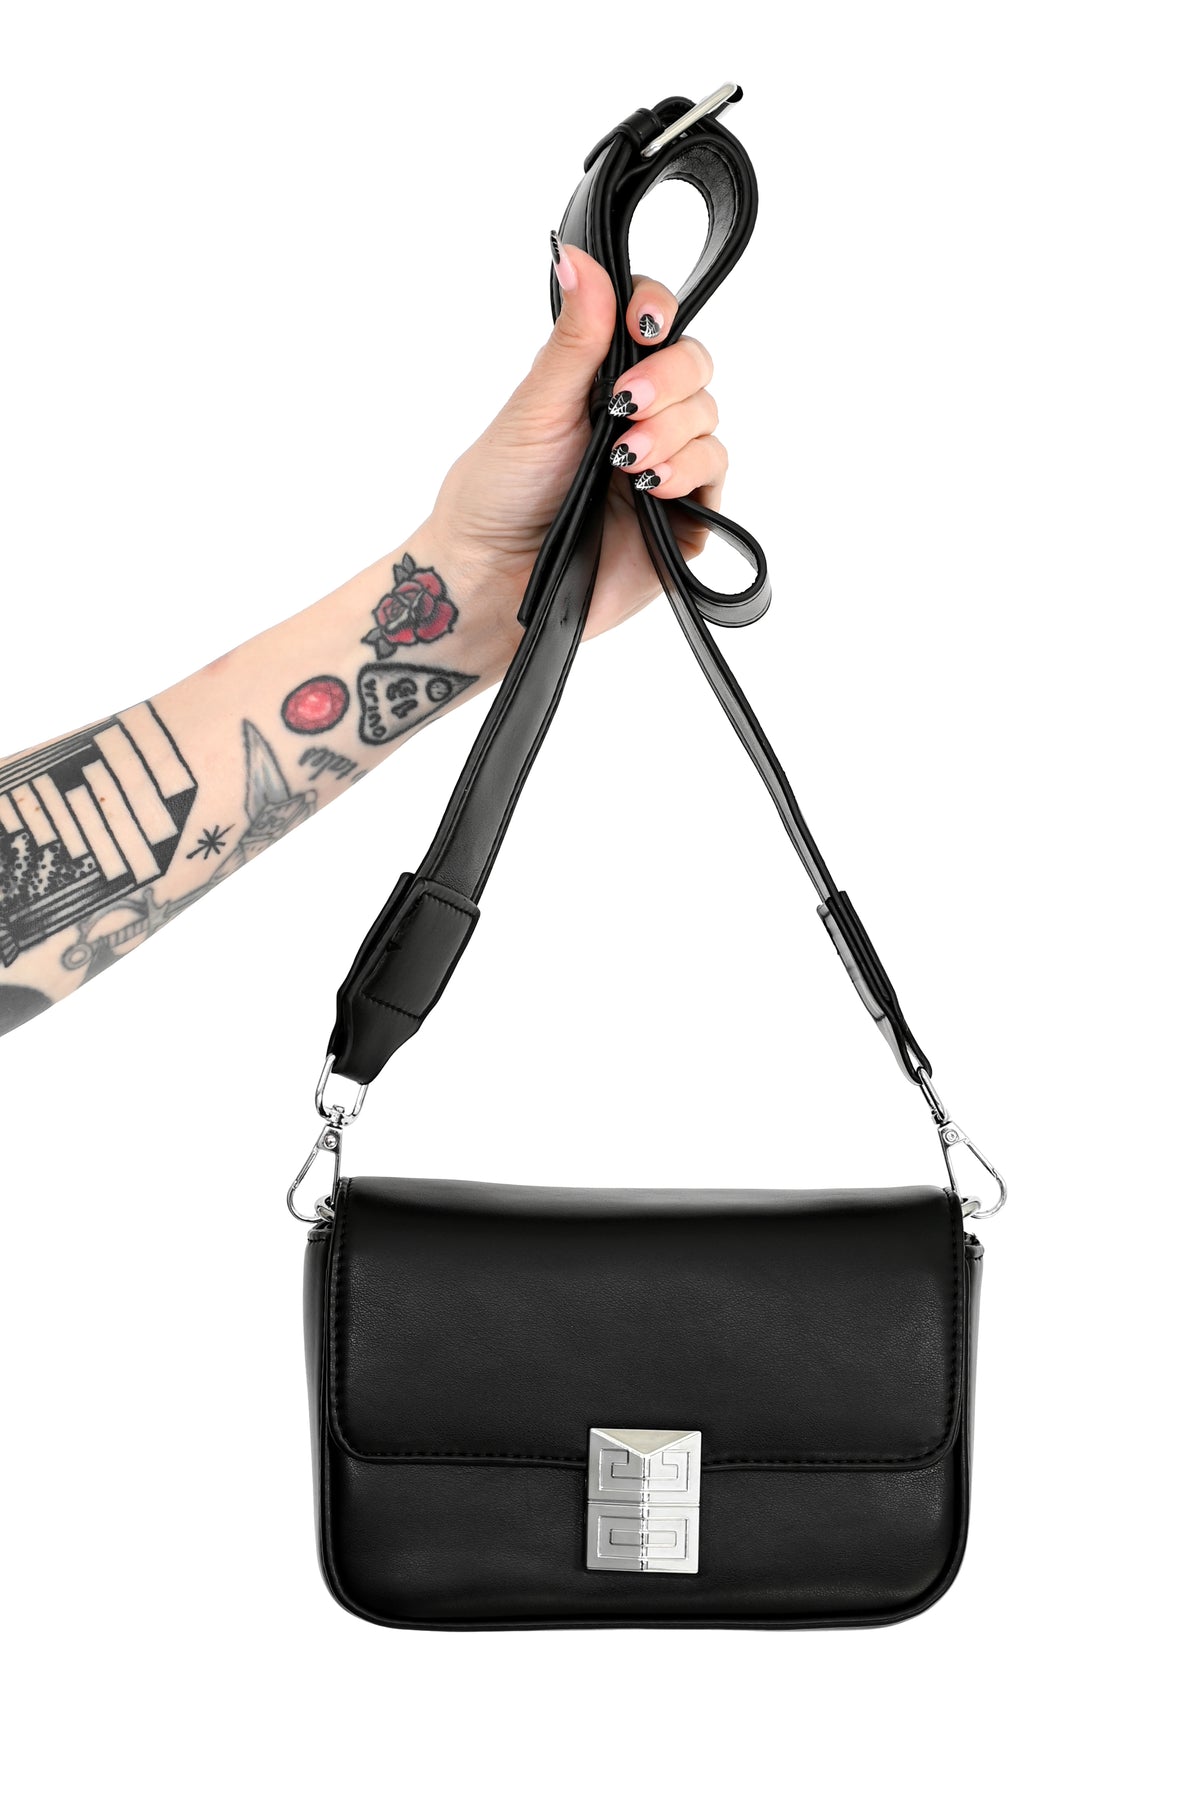 black faux leather bag with front detailed magnetic closure and faux leather crossbody strap